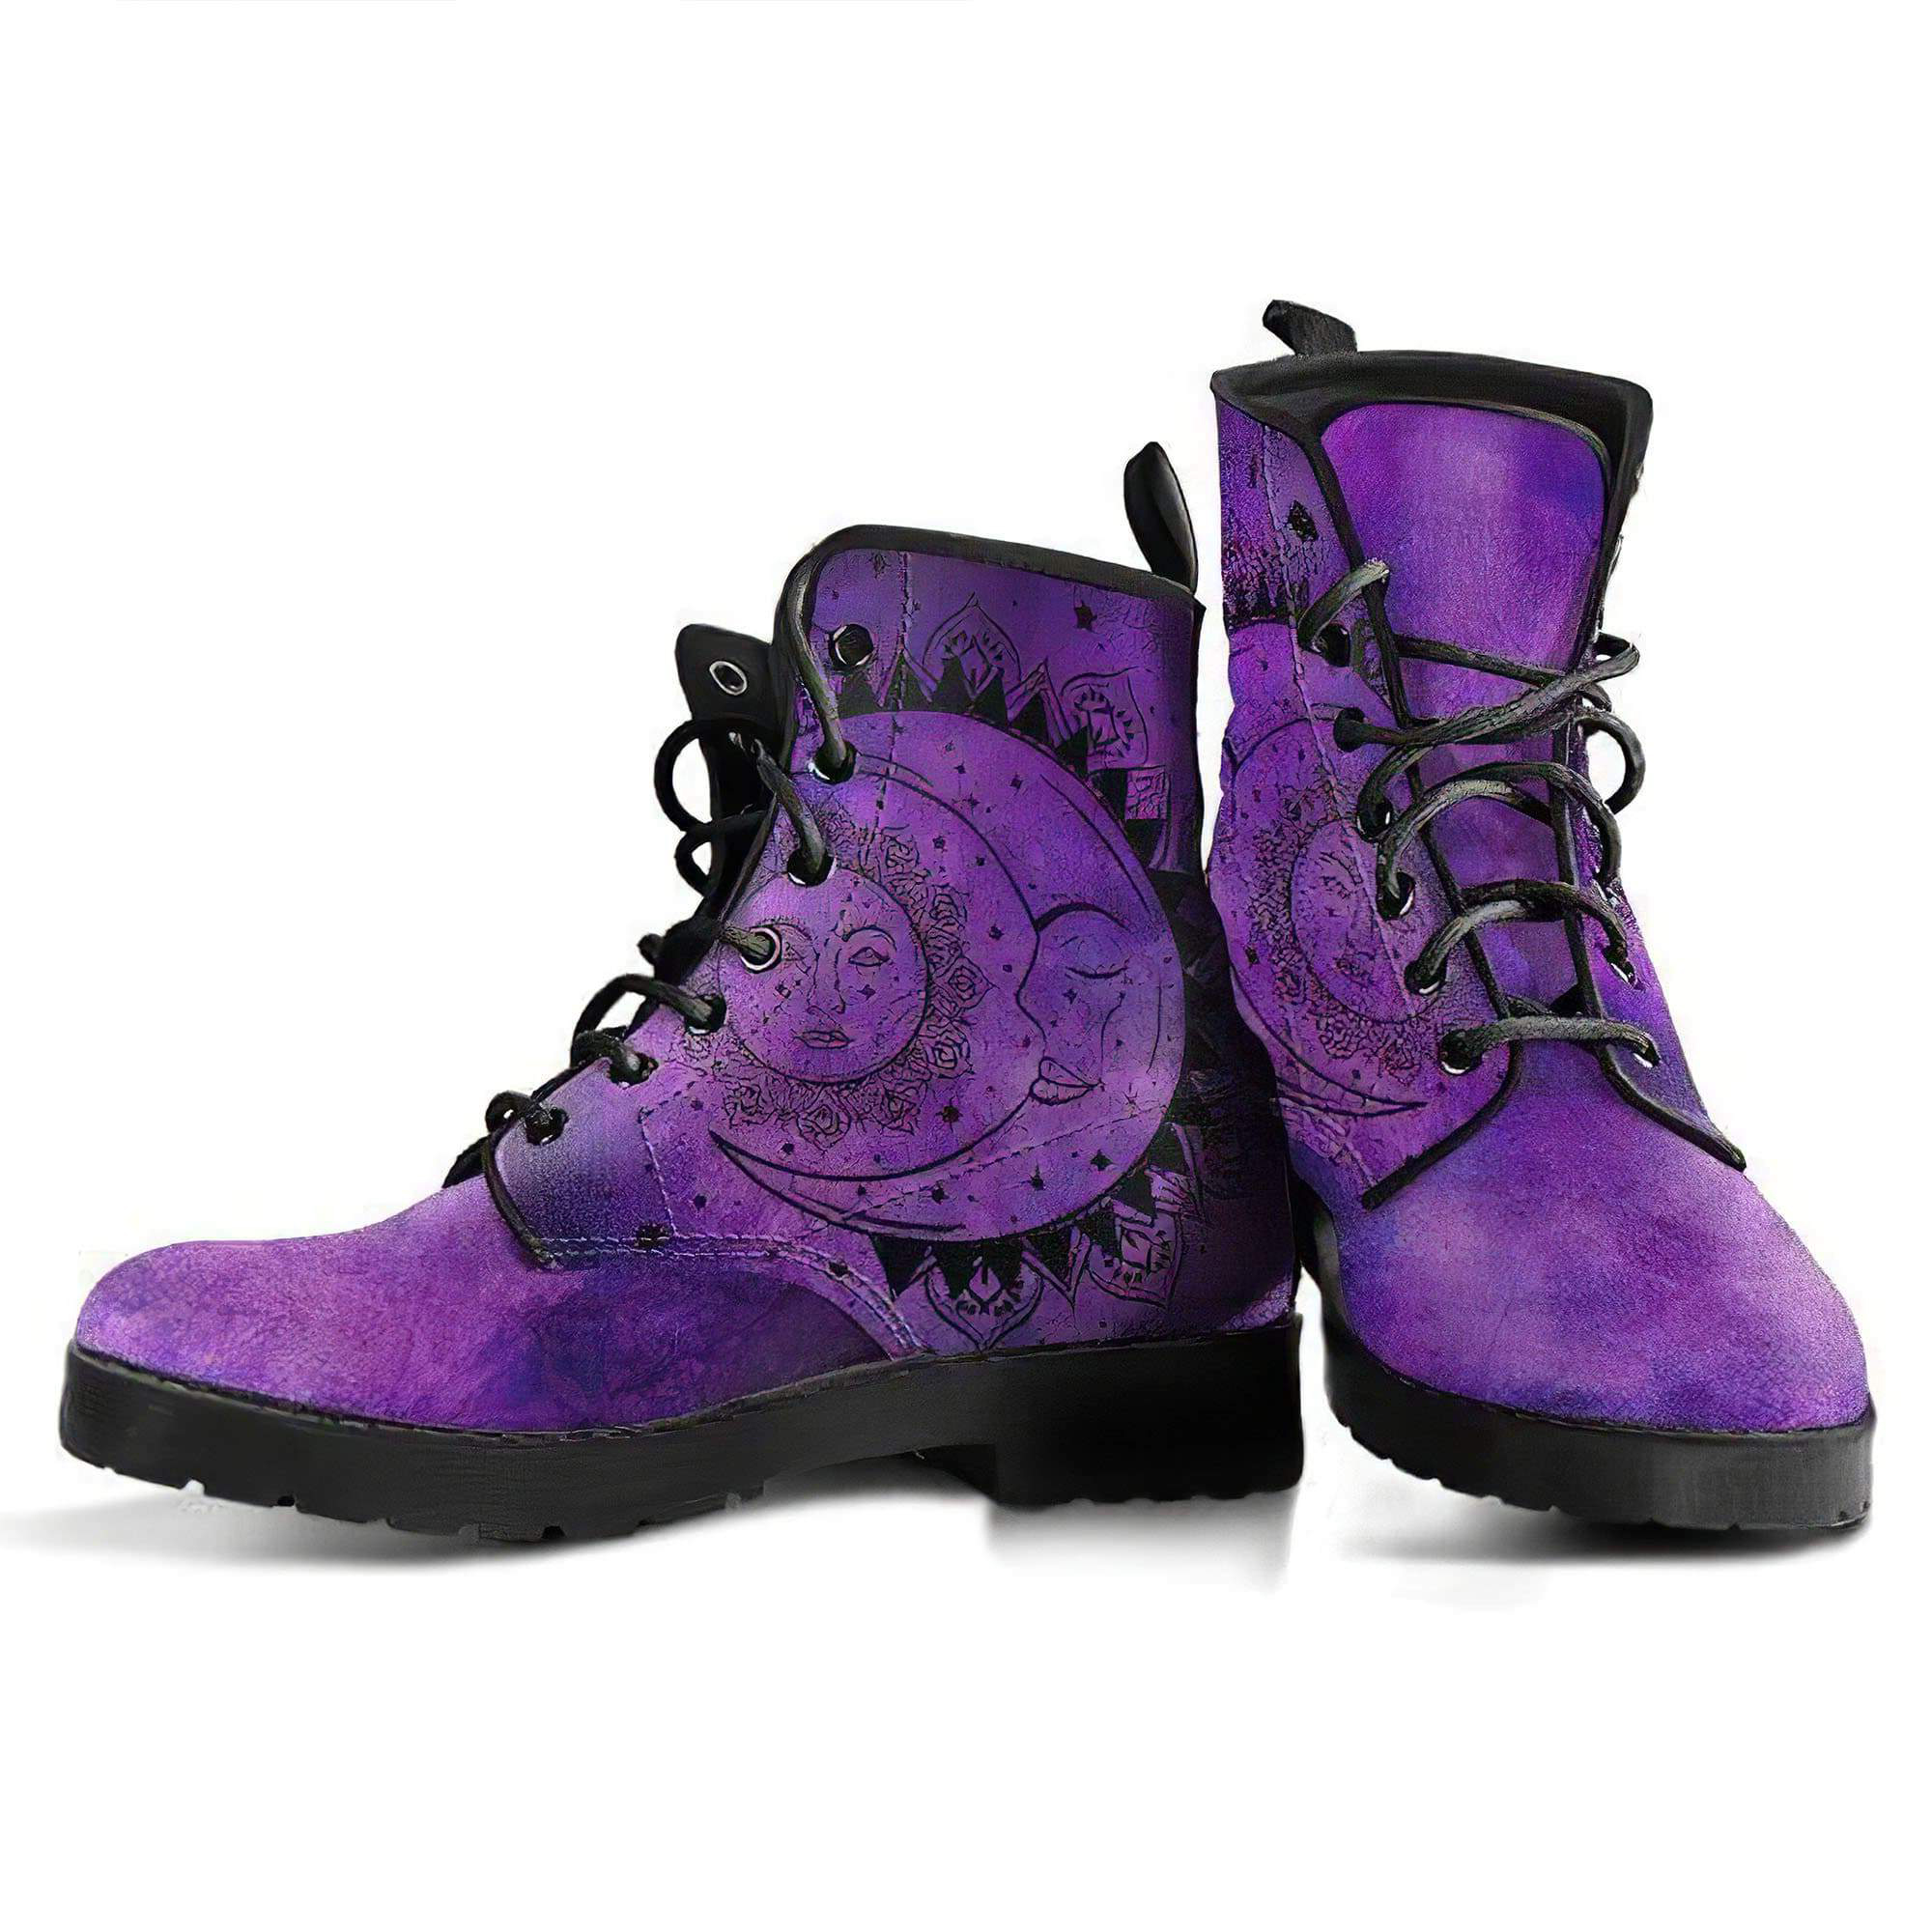 purple-sun-and-moon-handcrafted-boots-women-s-leather-boots-12051940180029.jpg